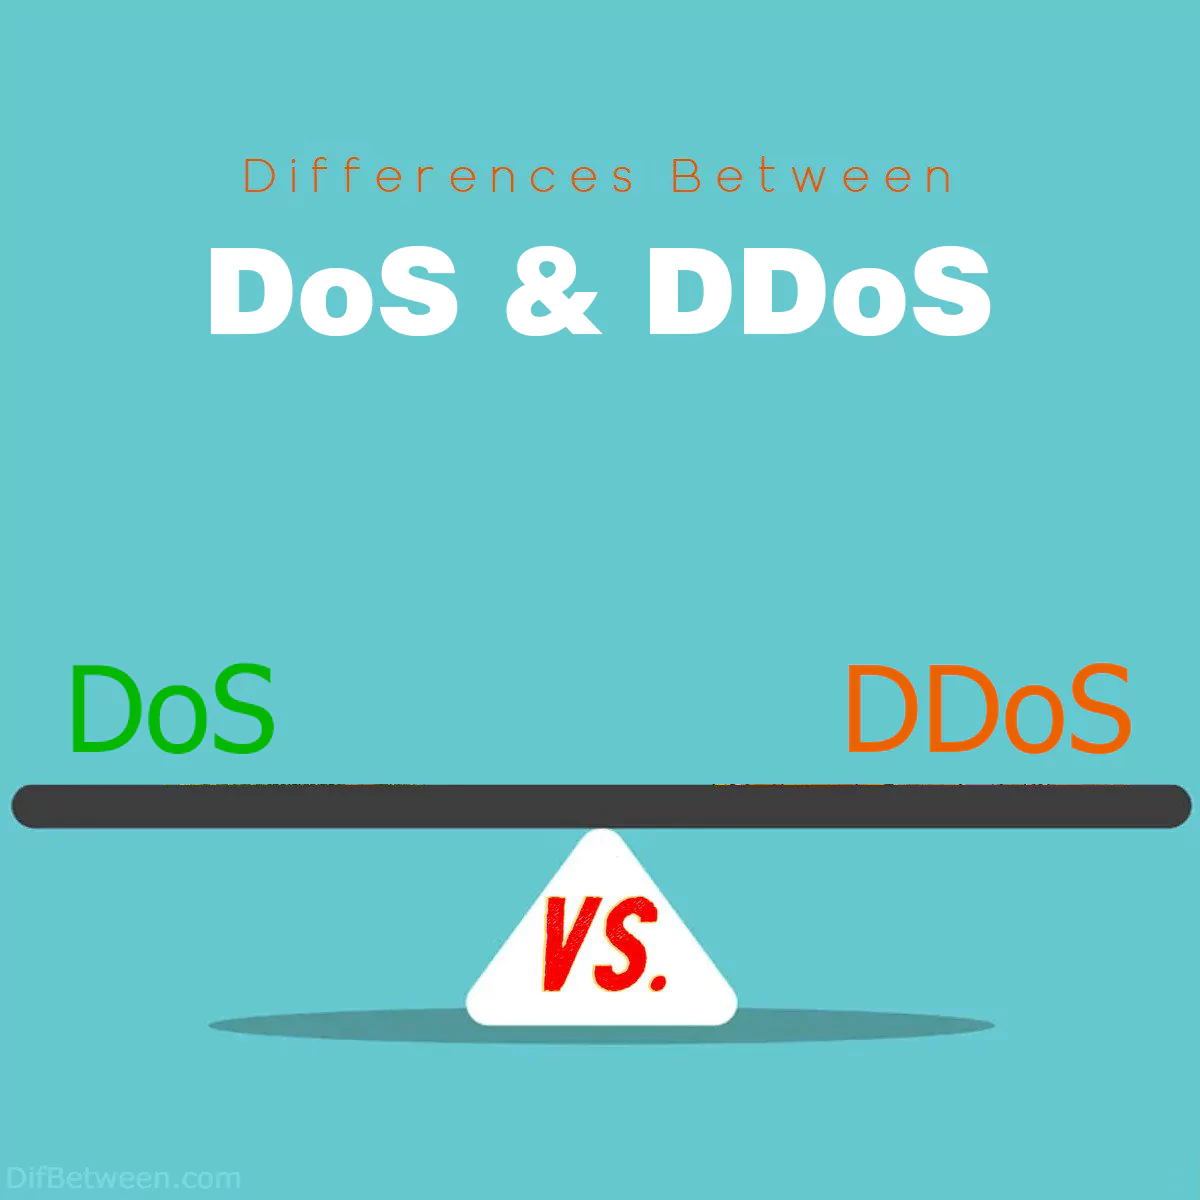 Differences Between DoS and DDoS